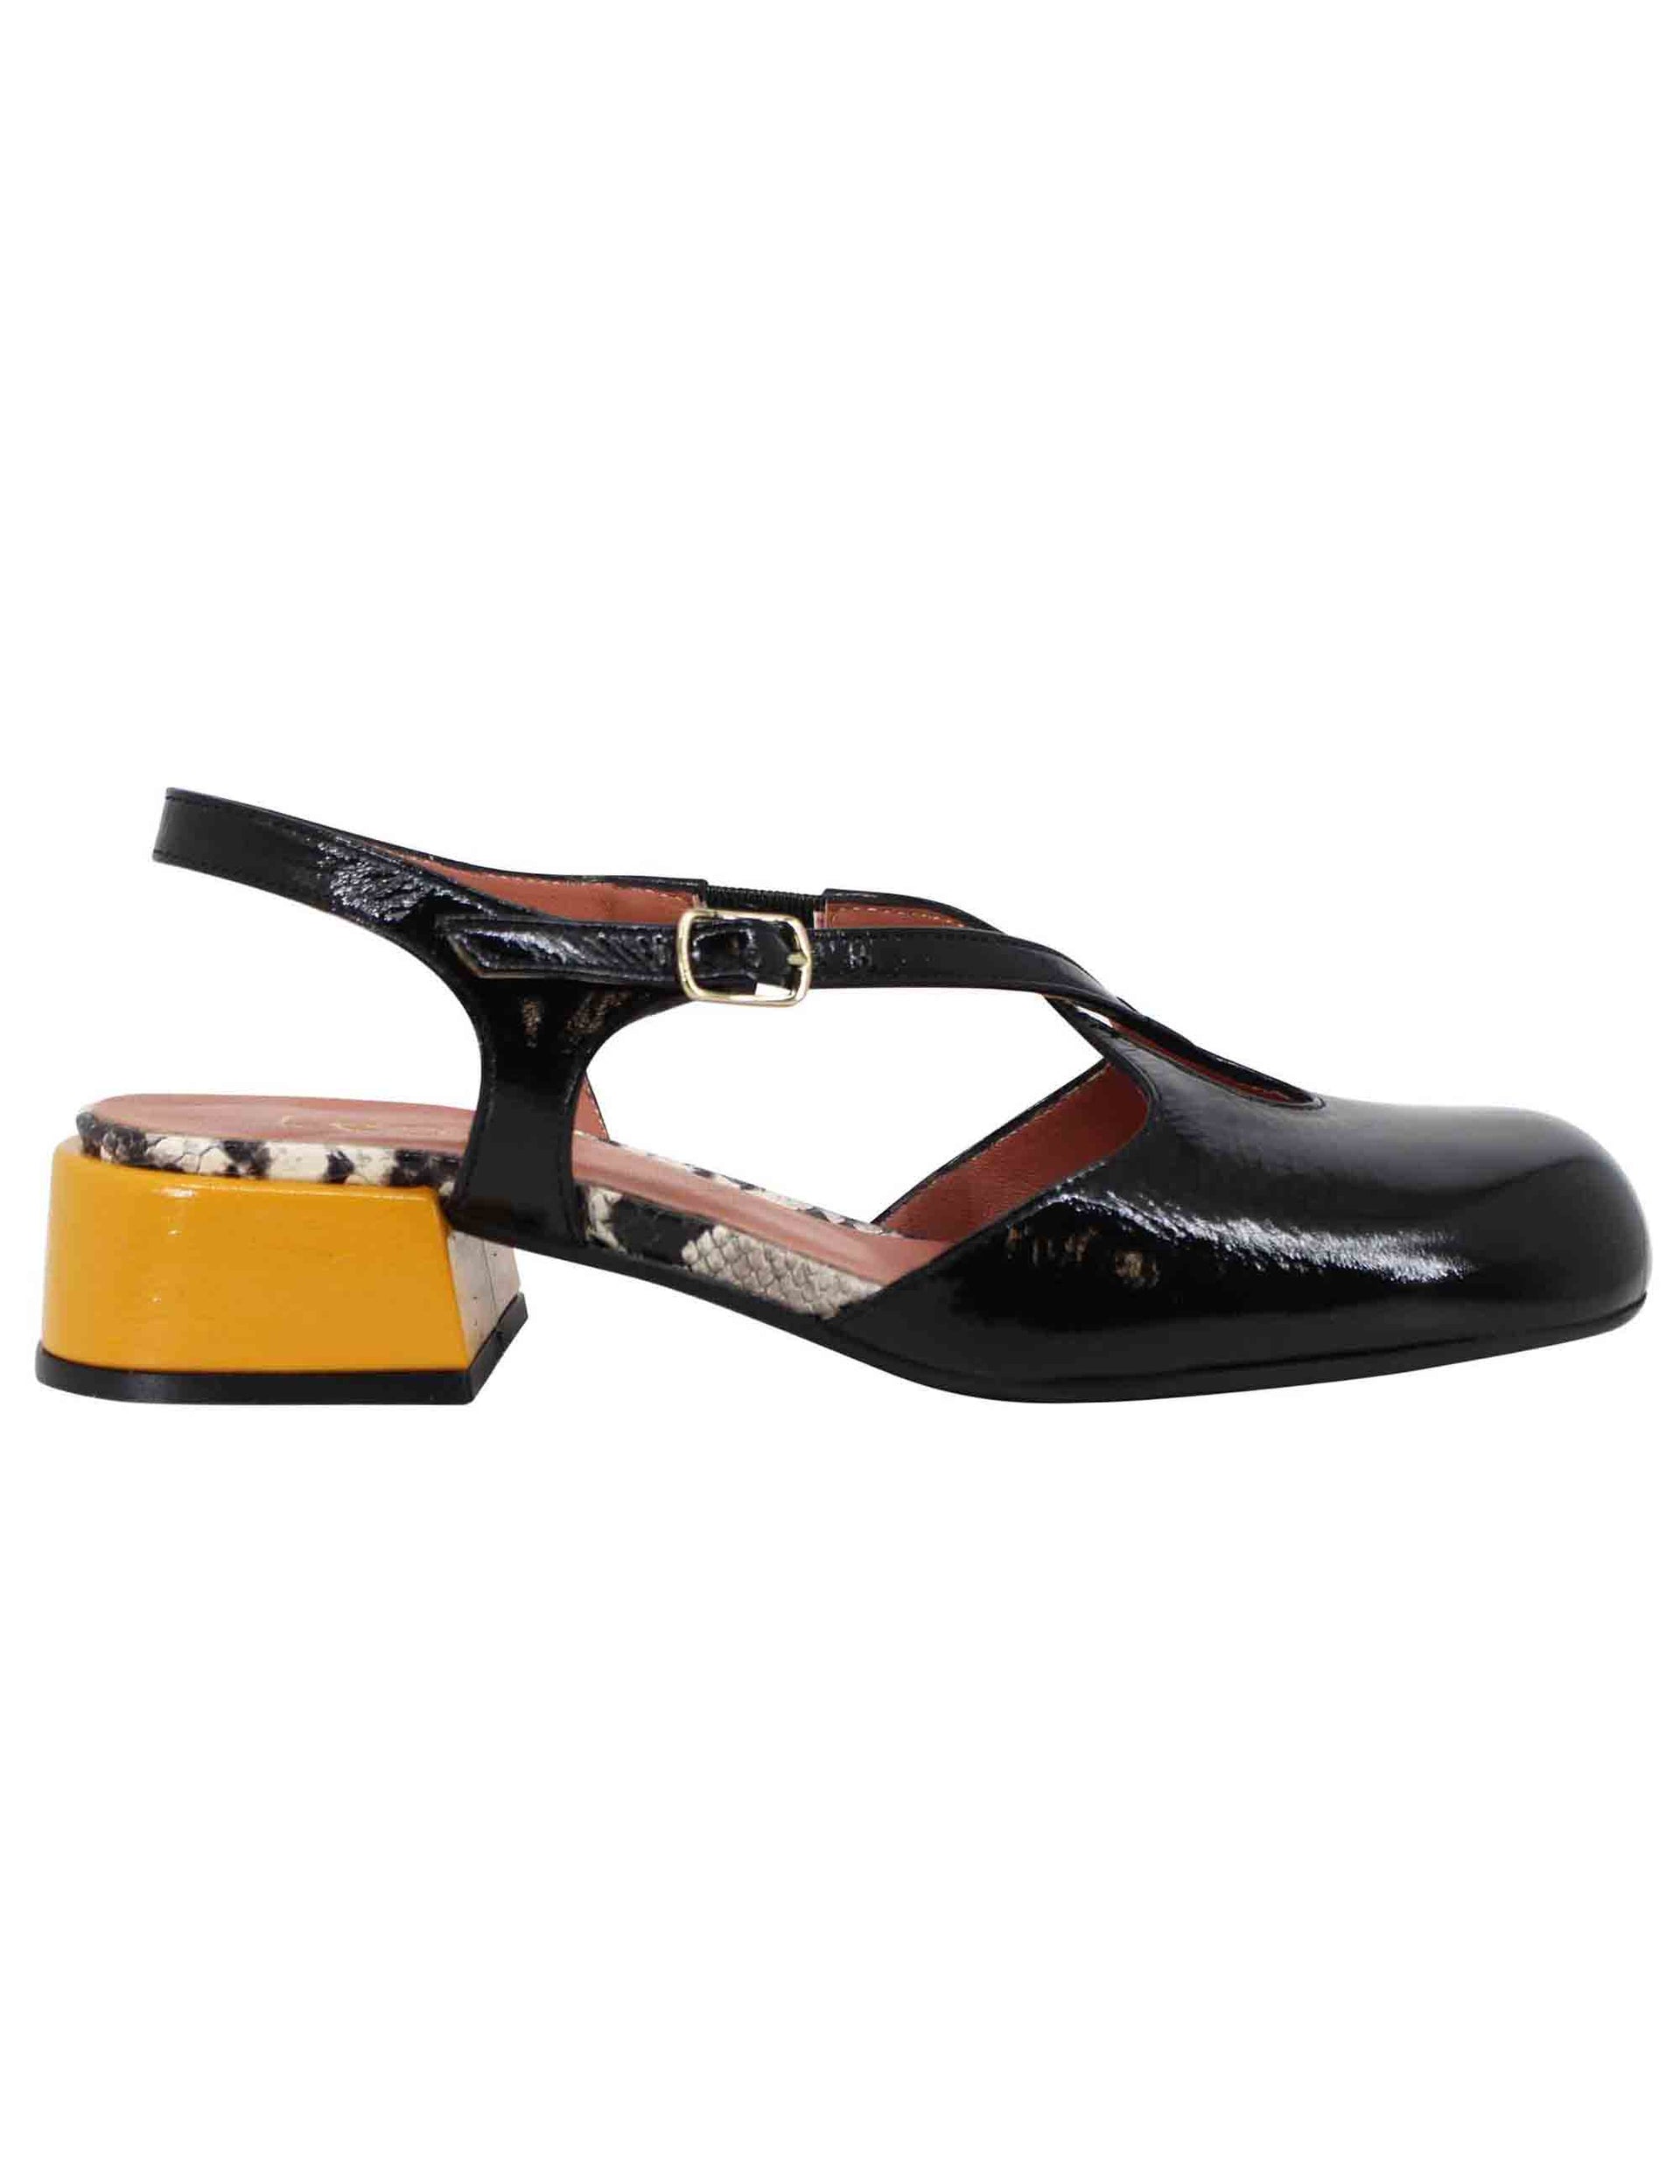 Women's slingback pumps in black patent leather with round toe